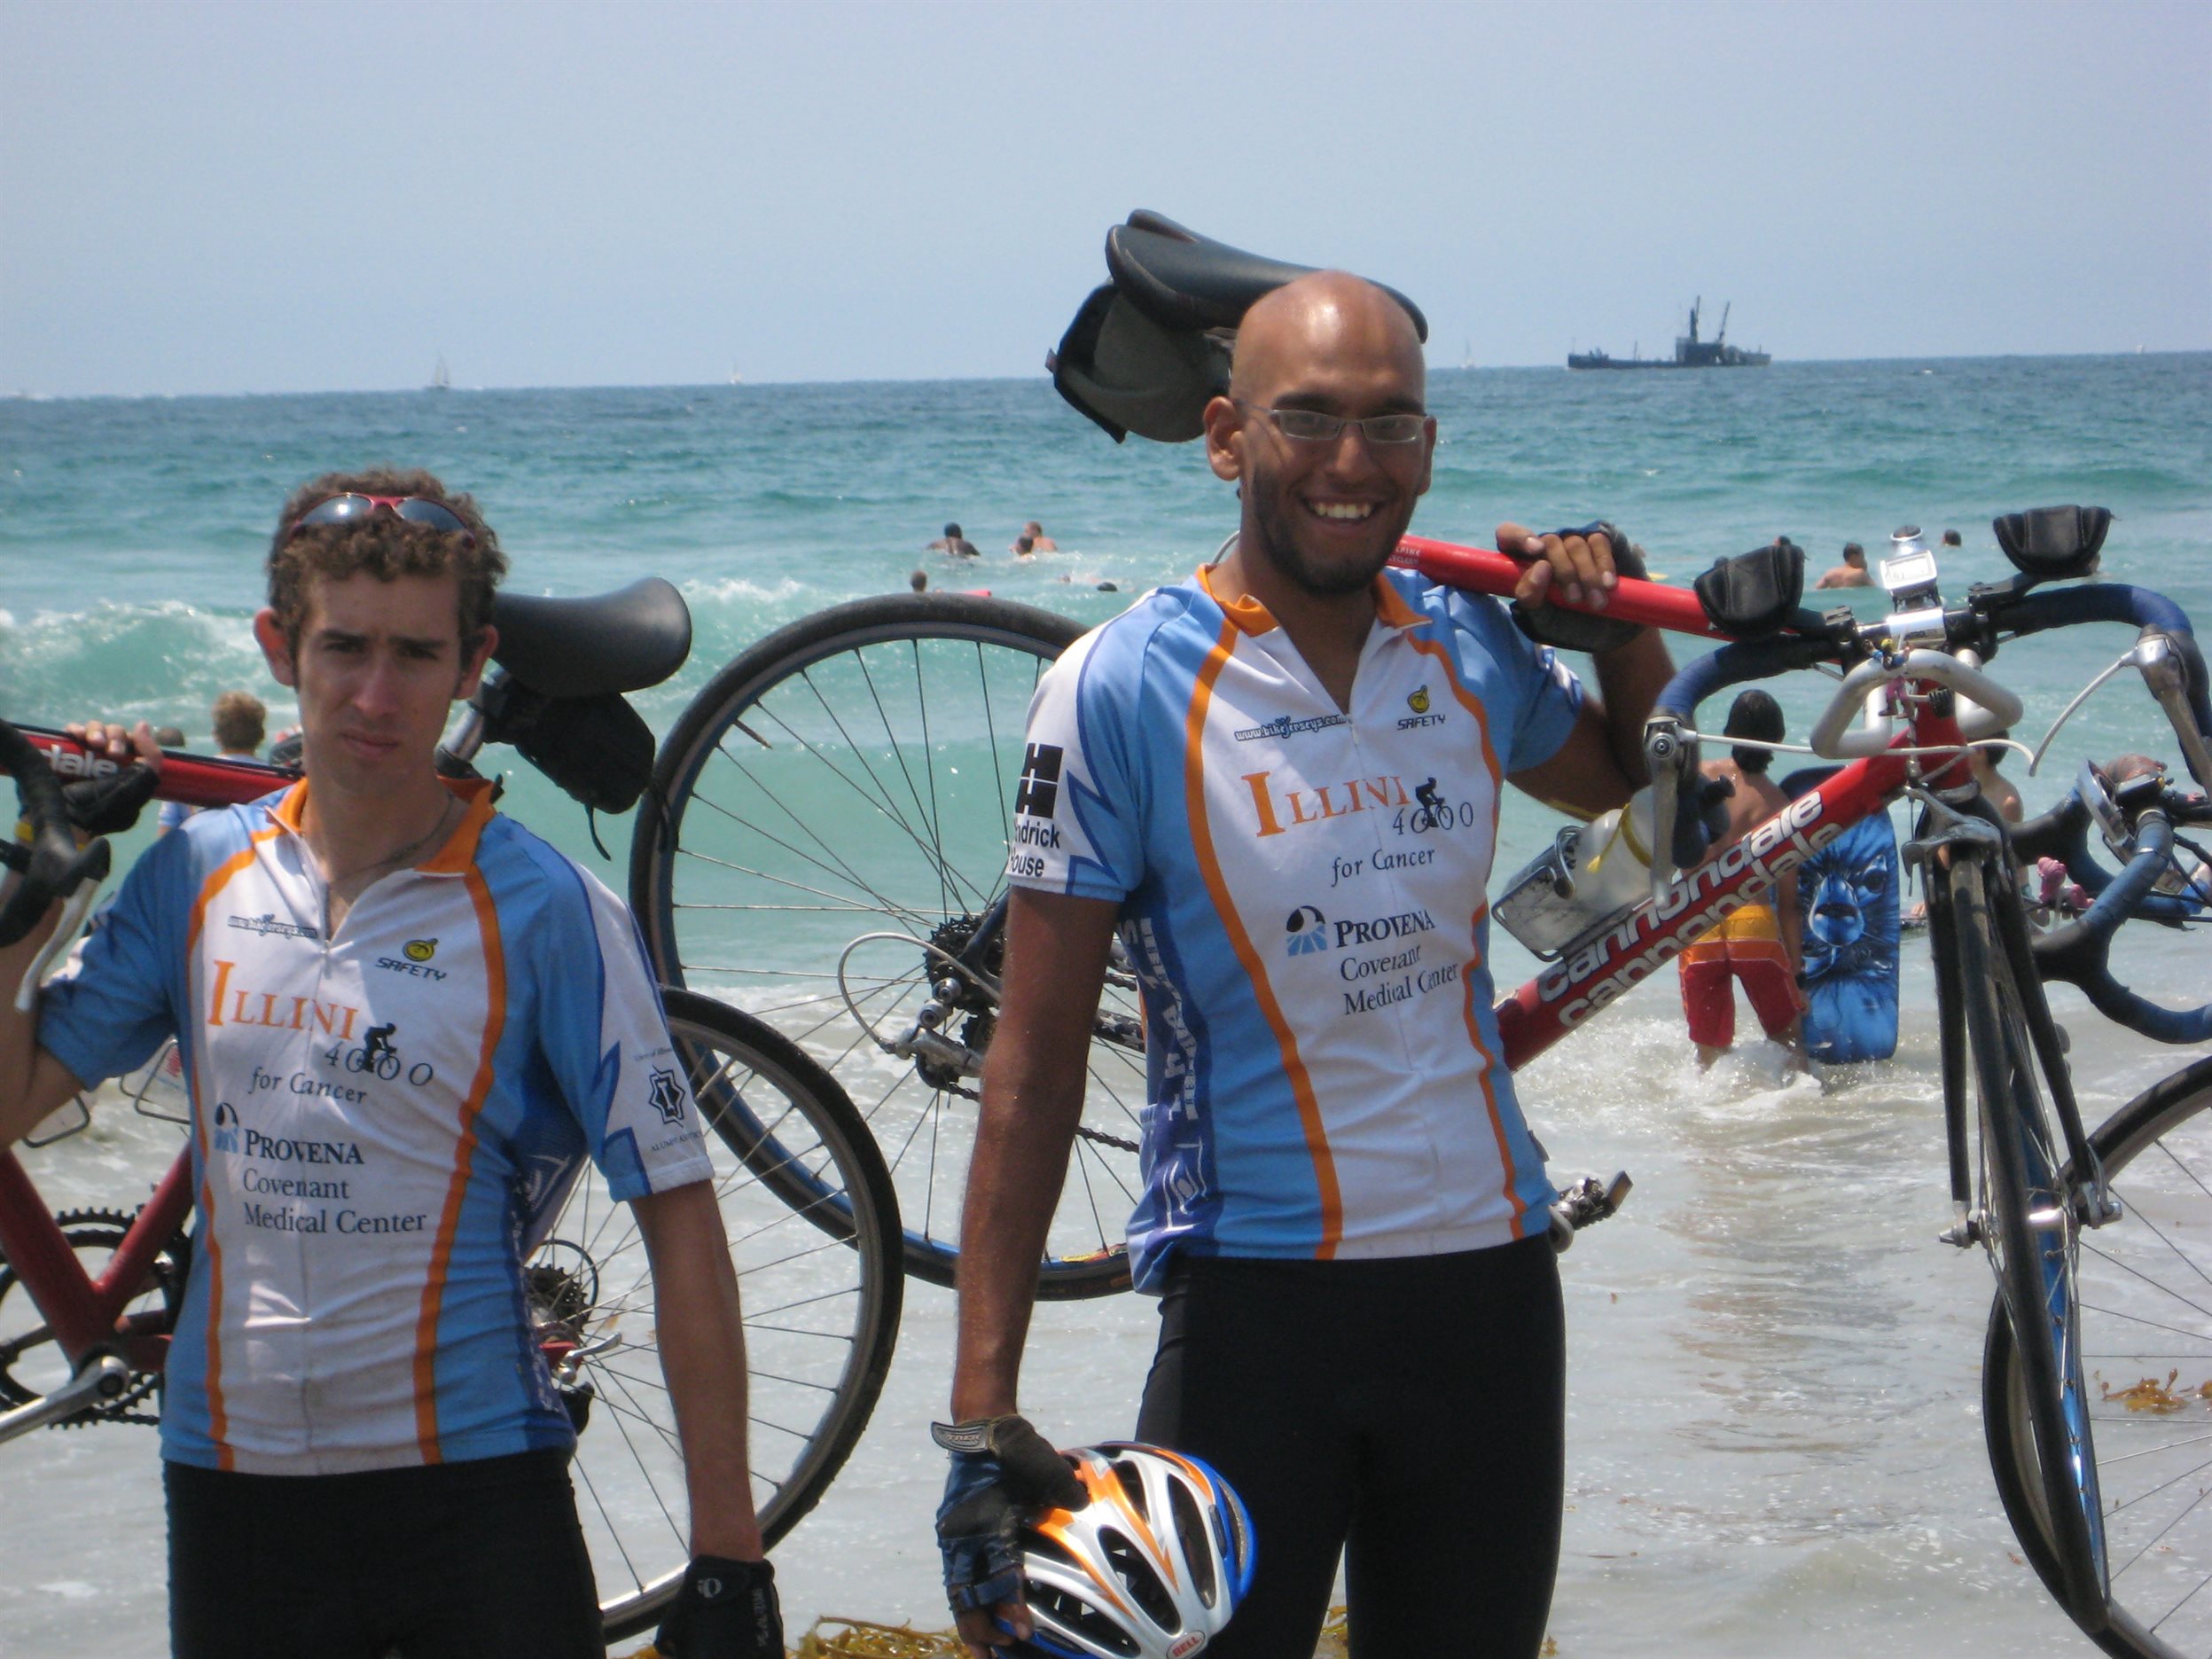 Anish Thakkar, right, is pictured with Illini 4000 co-founder, Jonathan Schlesinger during the team's inaugural ride in 2007. (Photo courtesy of Anish Thakkar.)